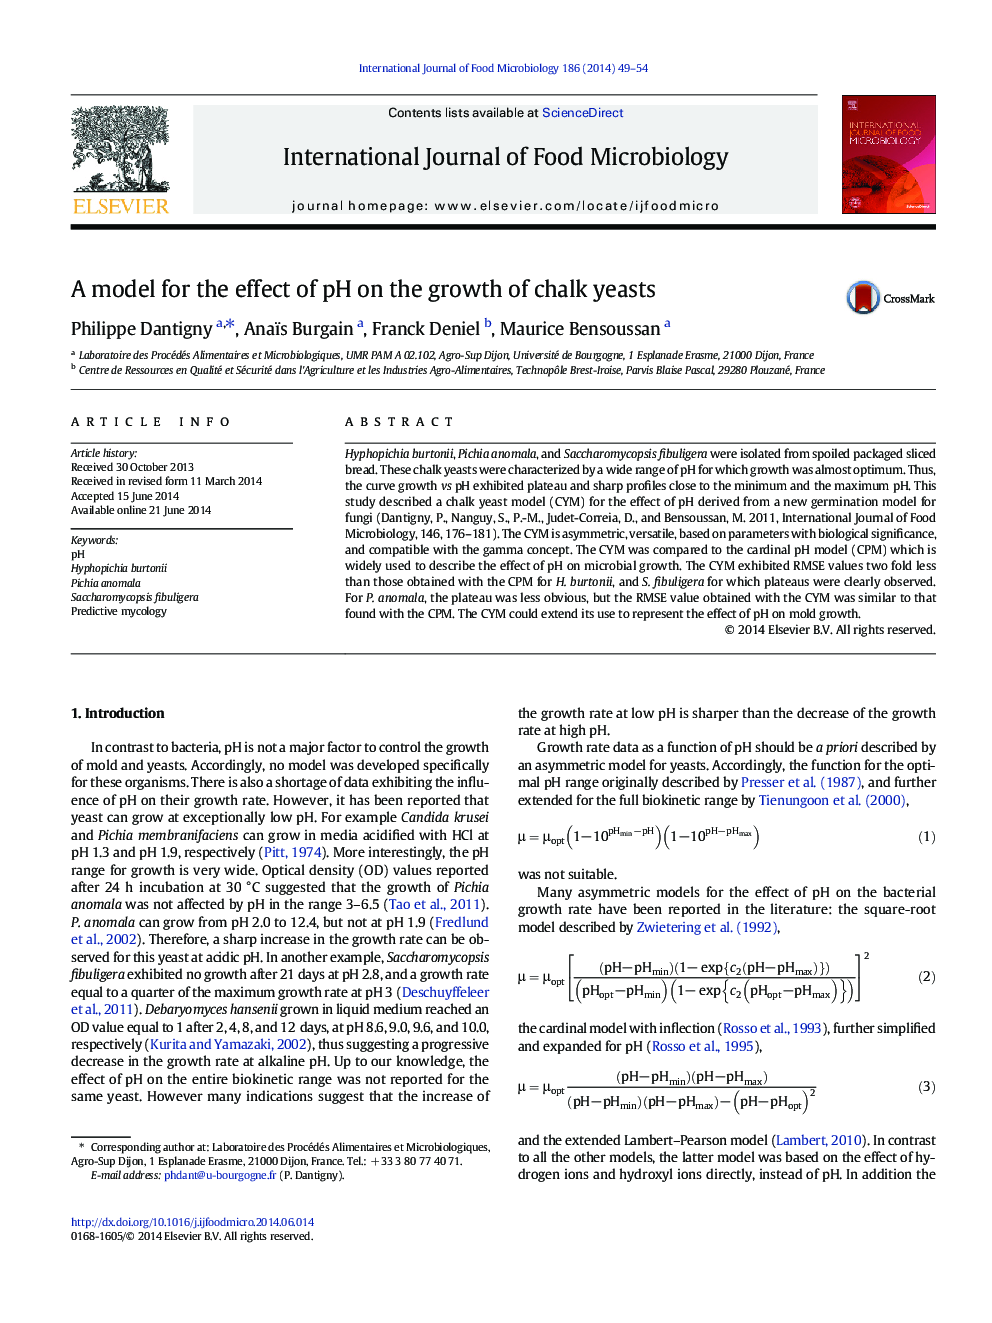 A model for the effect of pH on the growth of chalk yeasts